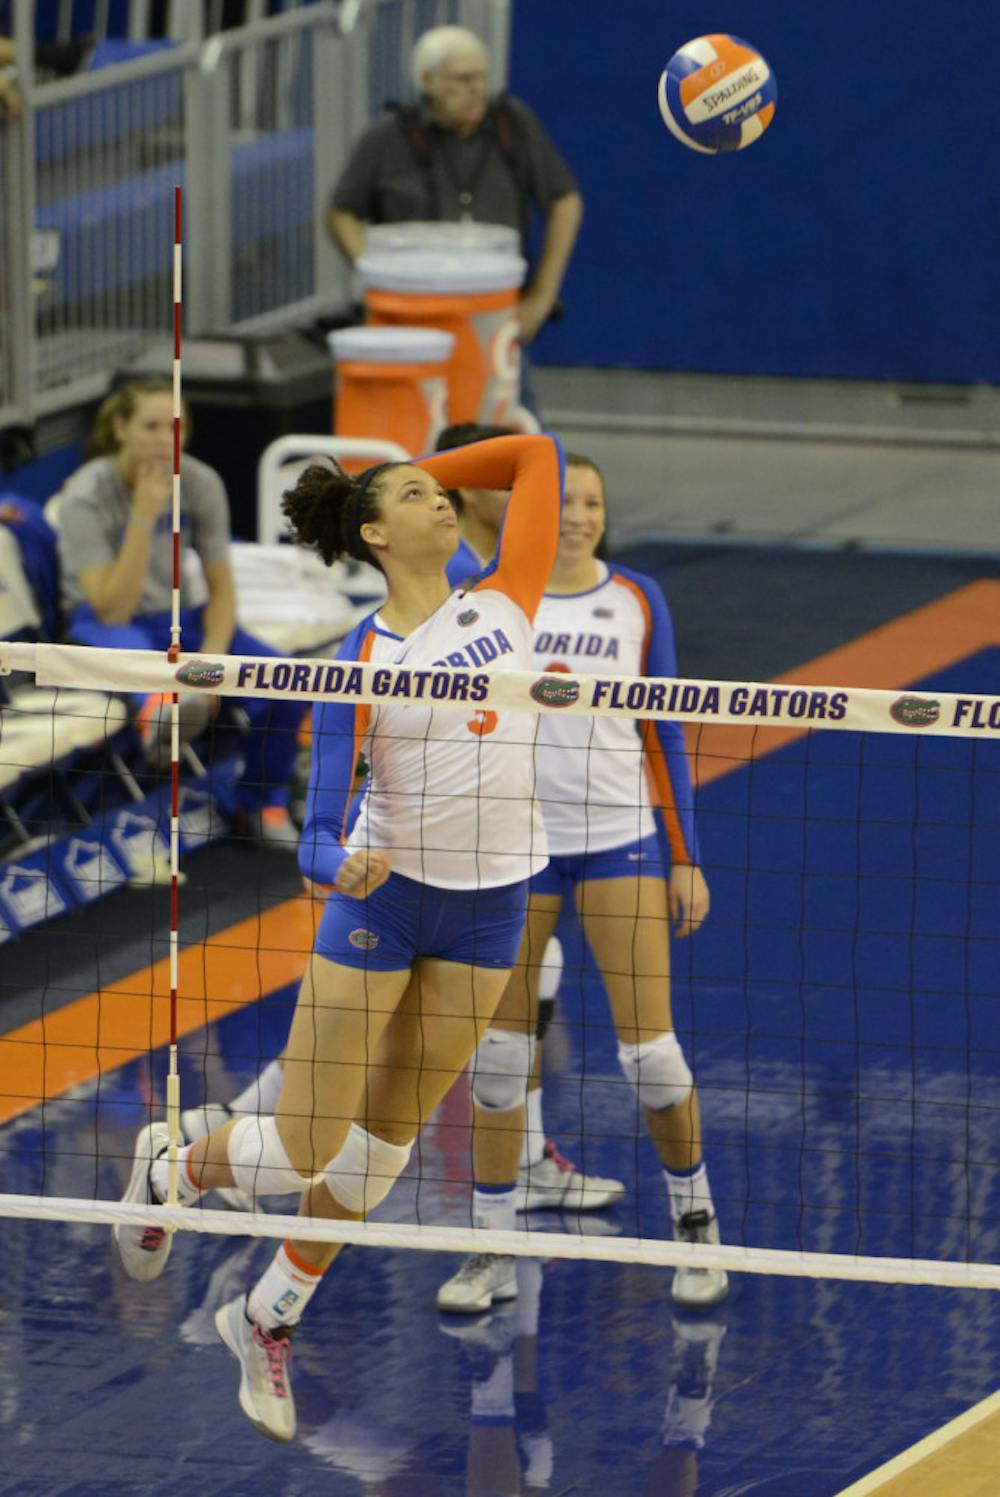 <p class="p1">Alex Holston swings at the ball during Florida's 3-0 win against Tennessee on Oct. 27 in the O'Connell Center.</p>